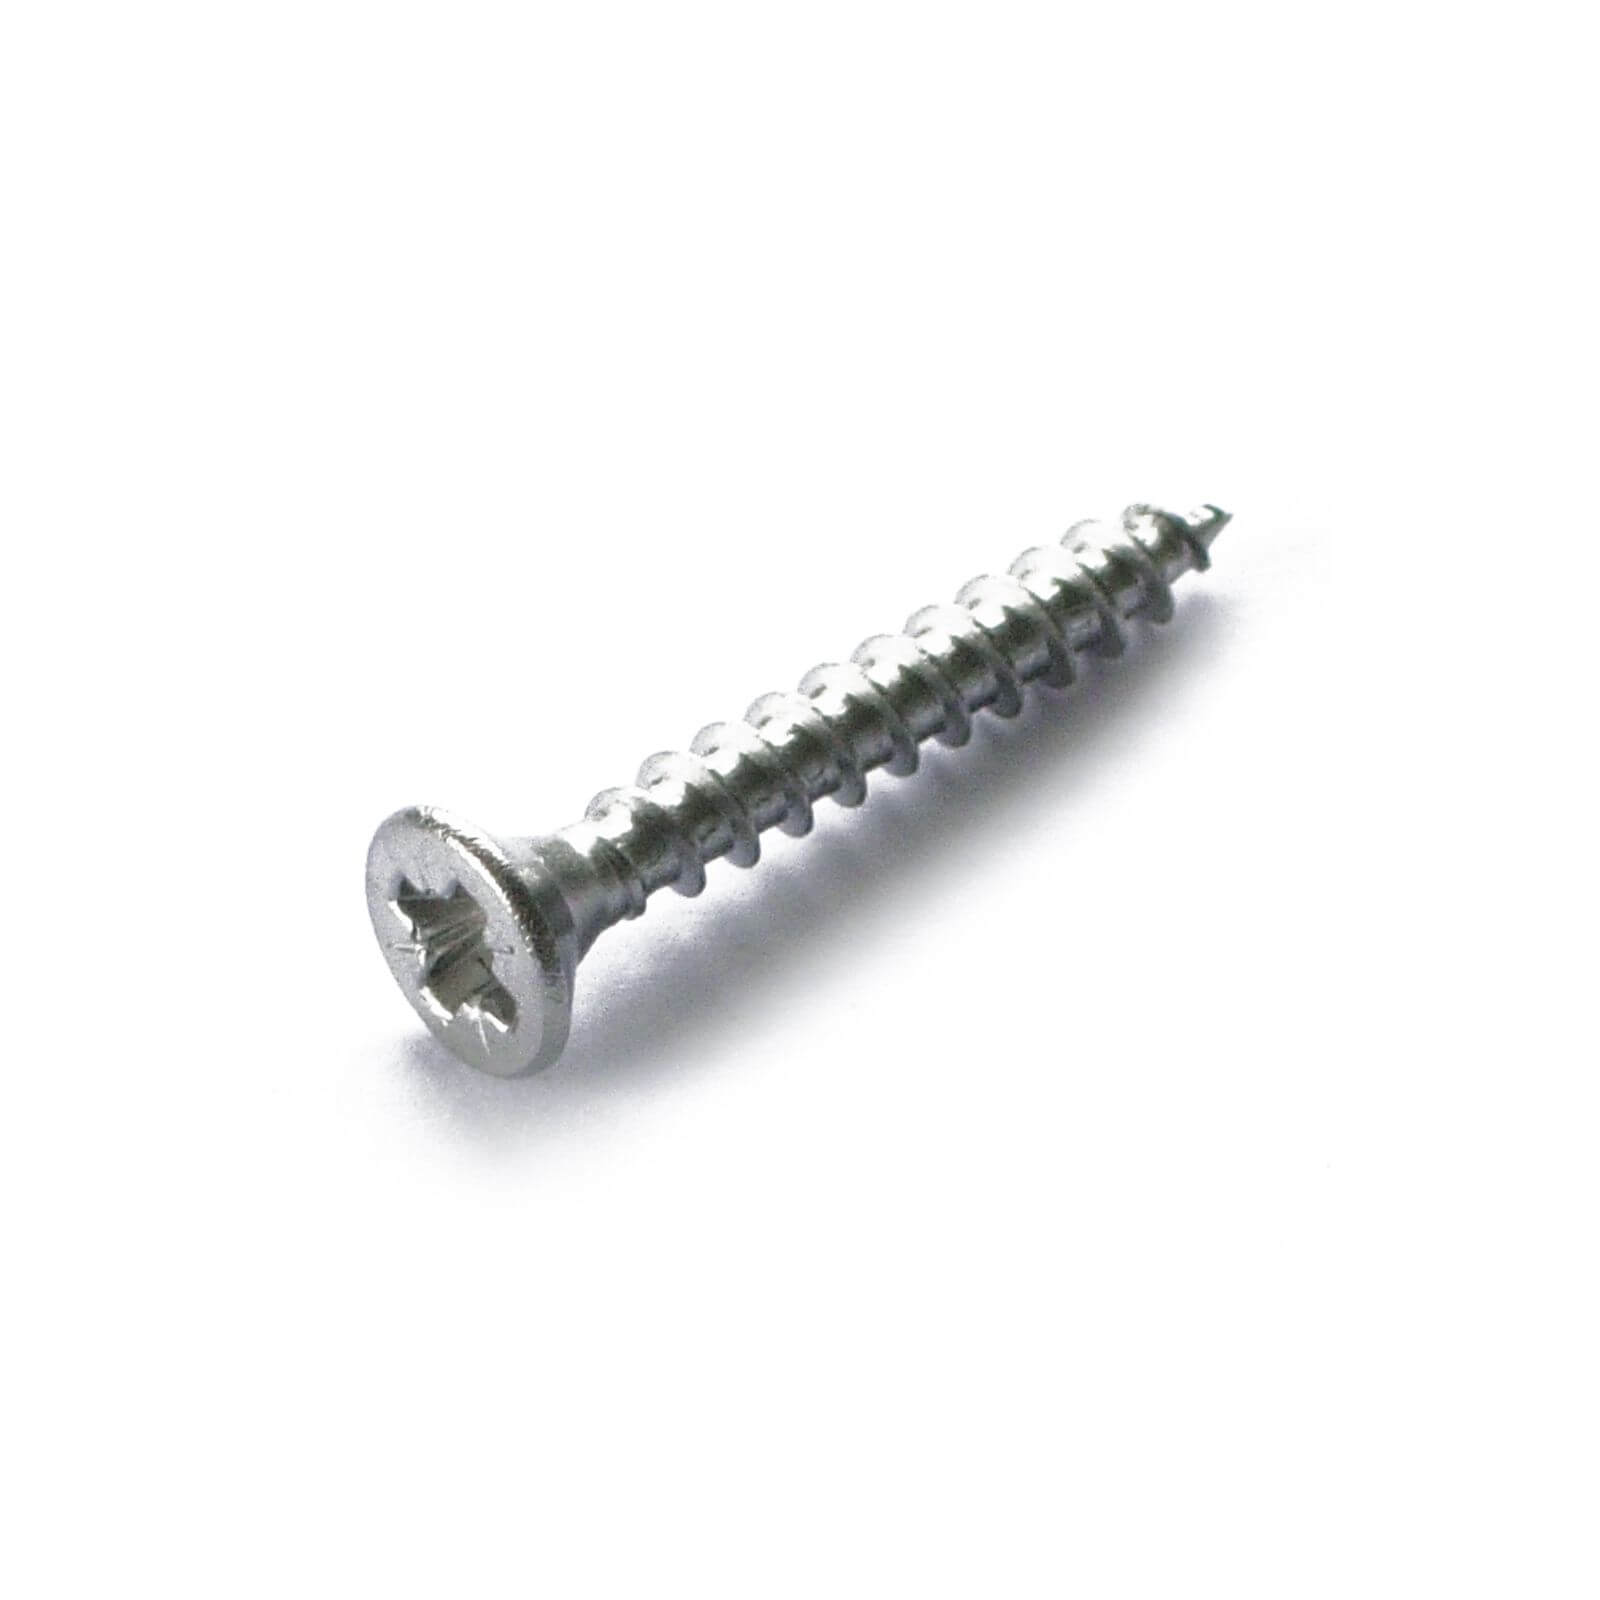 Single Thread Screw - Stainless Steel - 3.5 x 25mm - 25 Pack